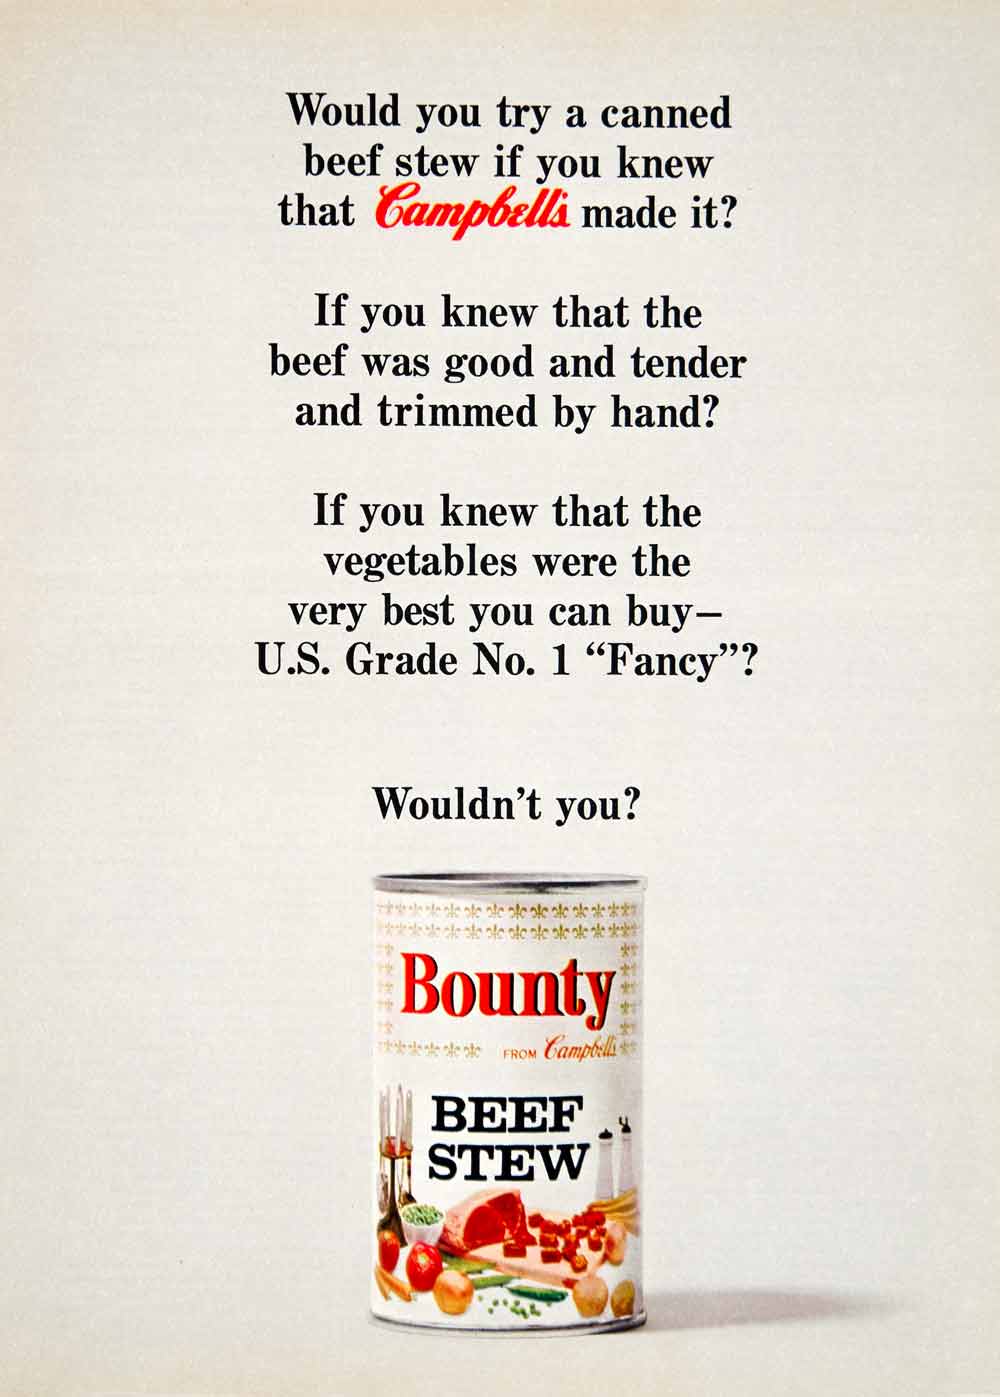 1964 Ad Vintage Campbell's Bounty Beef Stew Canned Food Convenience Tinned YWD2